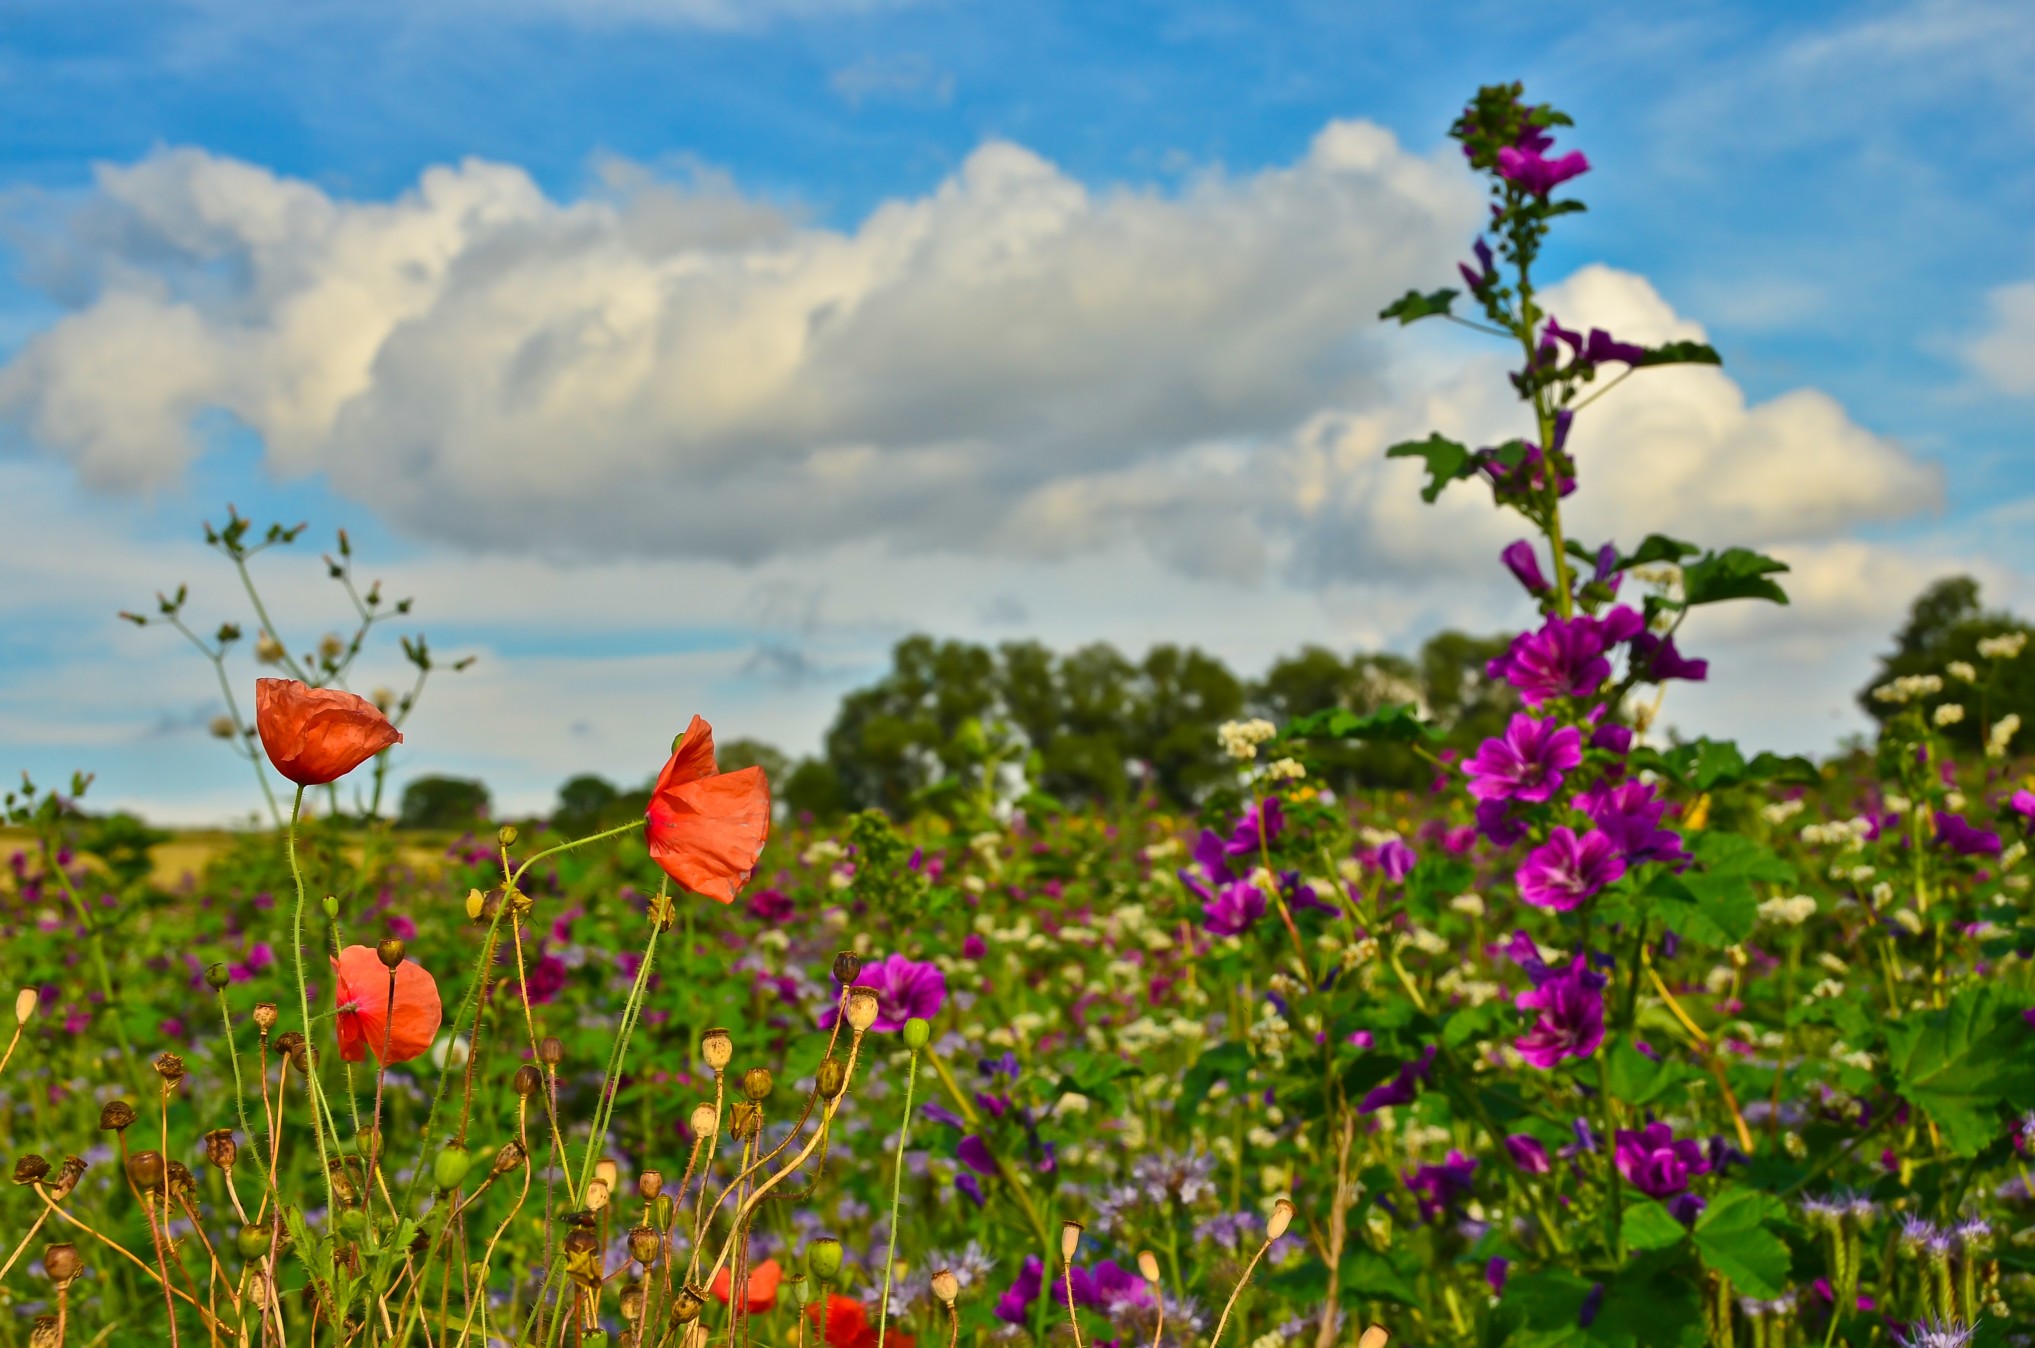 A Beautiful Meadow With Vibrant Wildflowers In Front Of A German Landscape Mallows Poppies And T20 A9rmw1